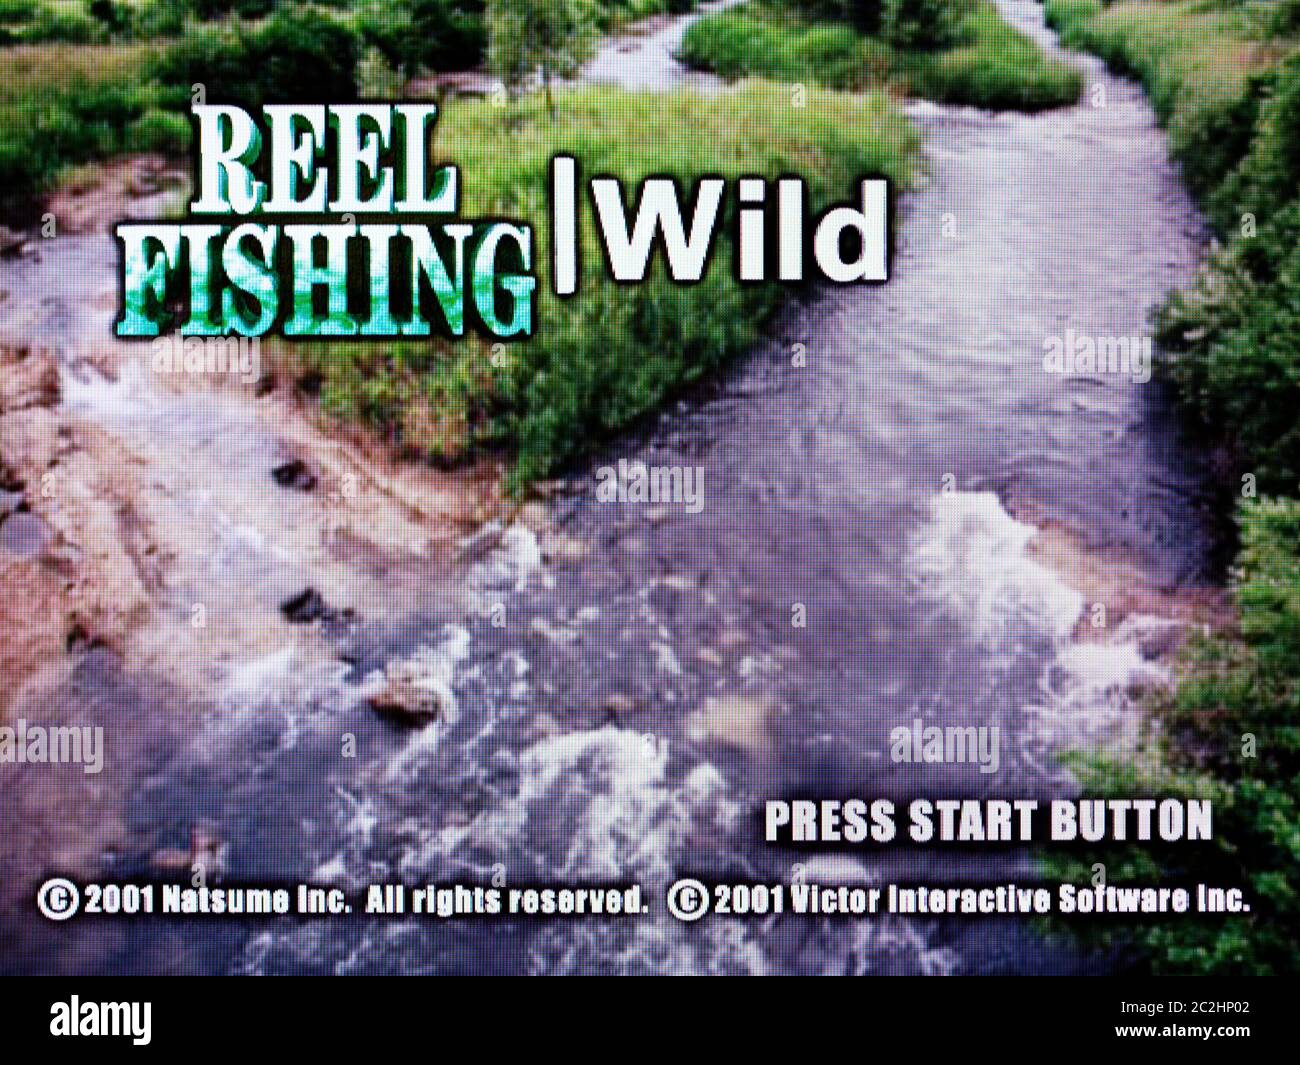 Reel Fishing Wild - Sega Dreamcast Videogame - Editorial use only Stock Photo